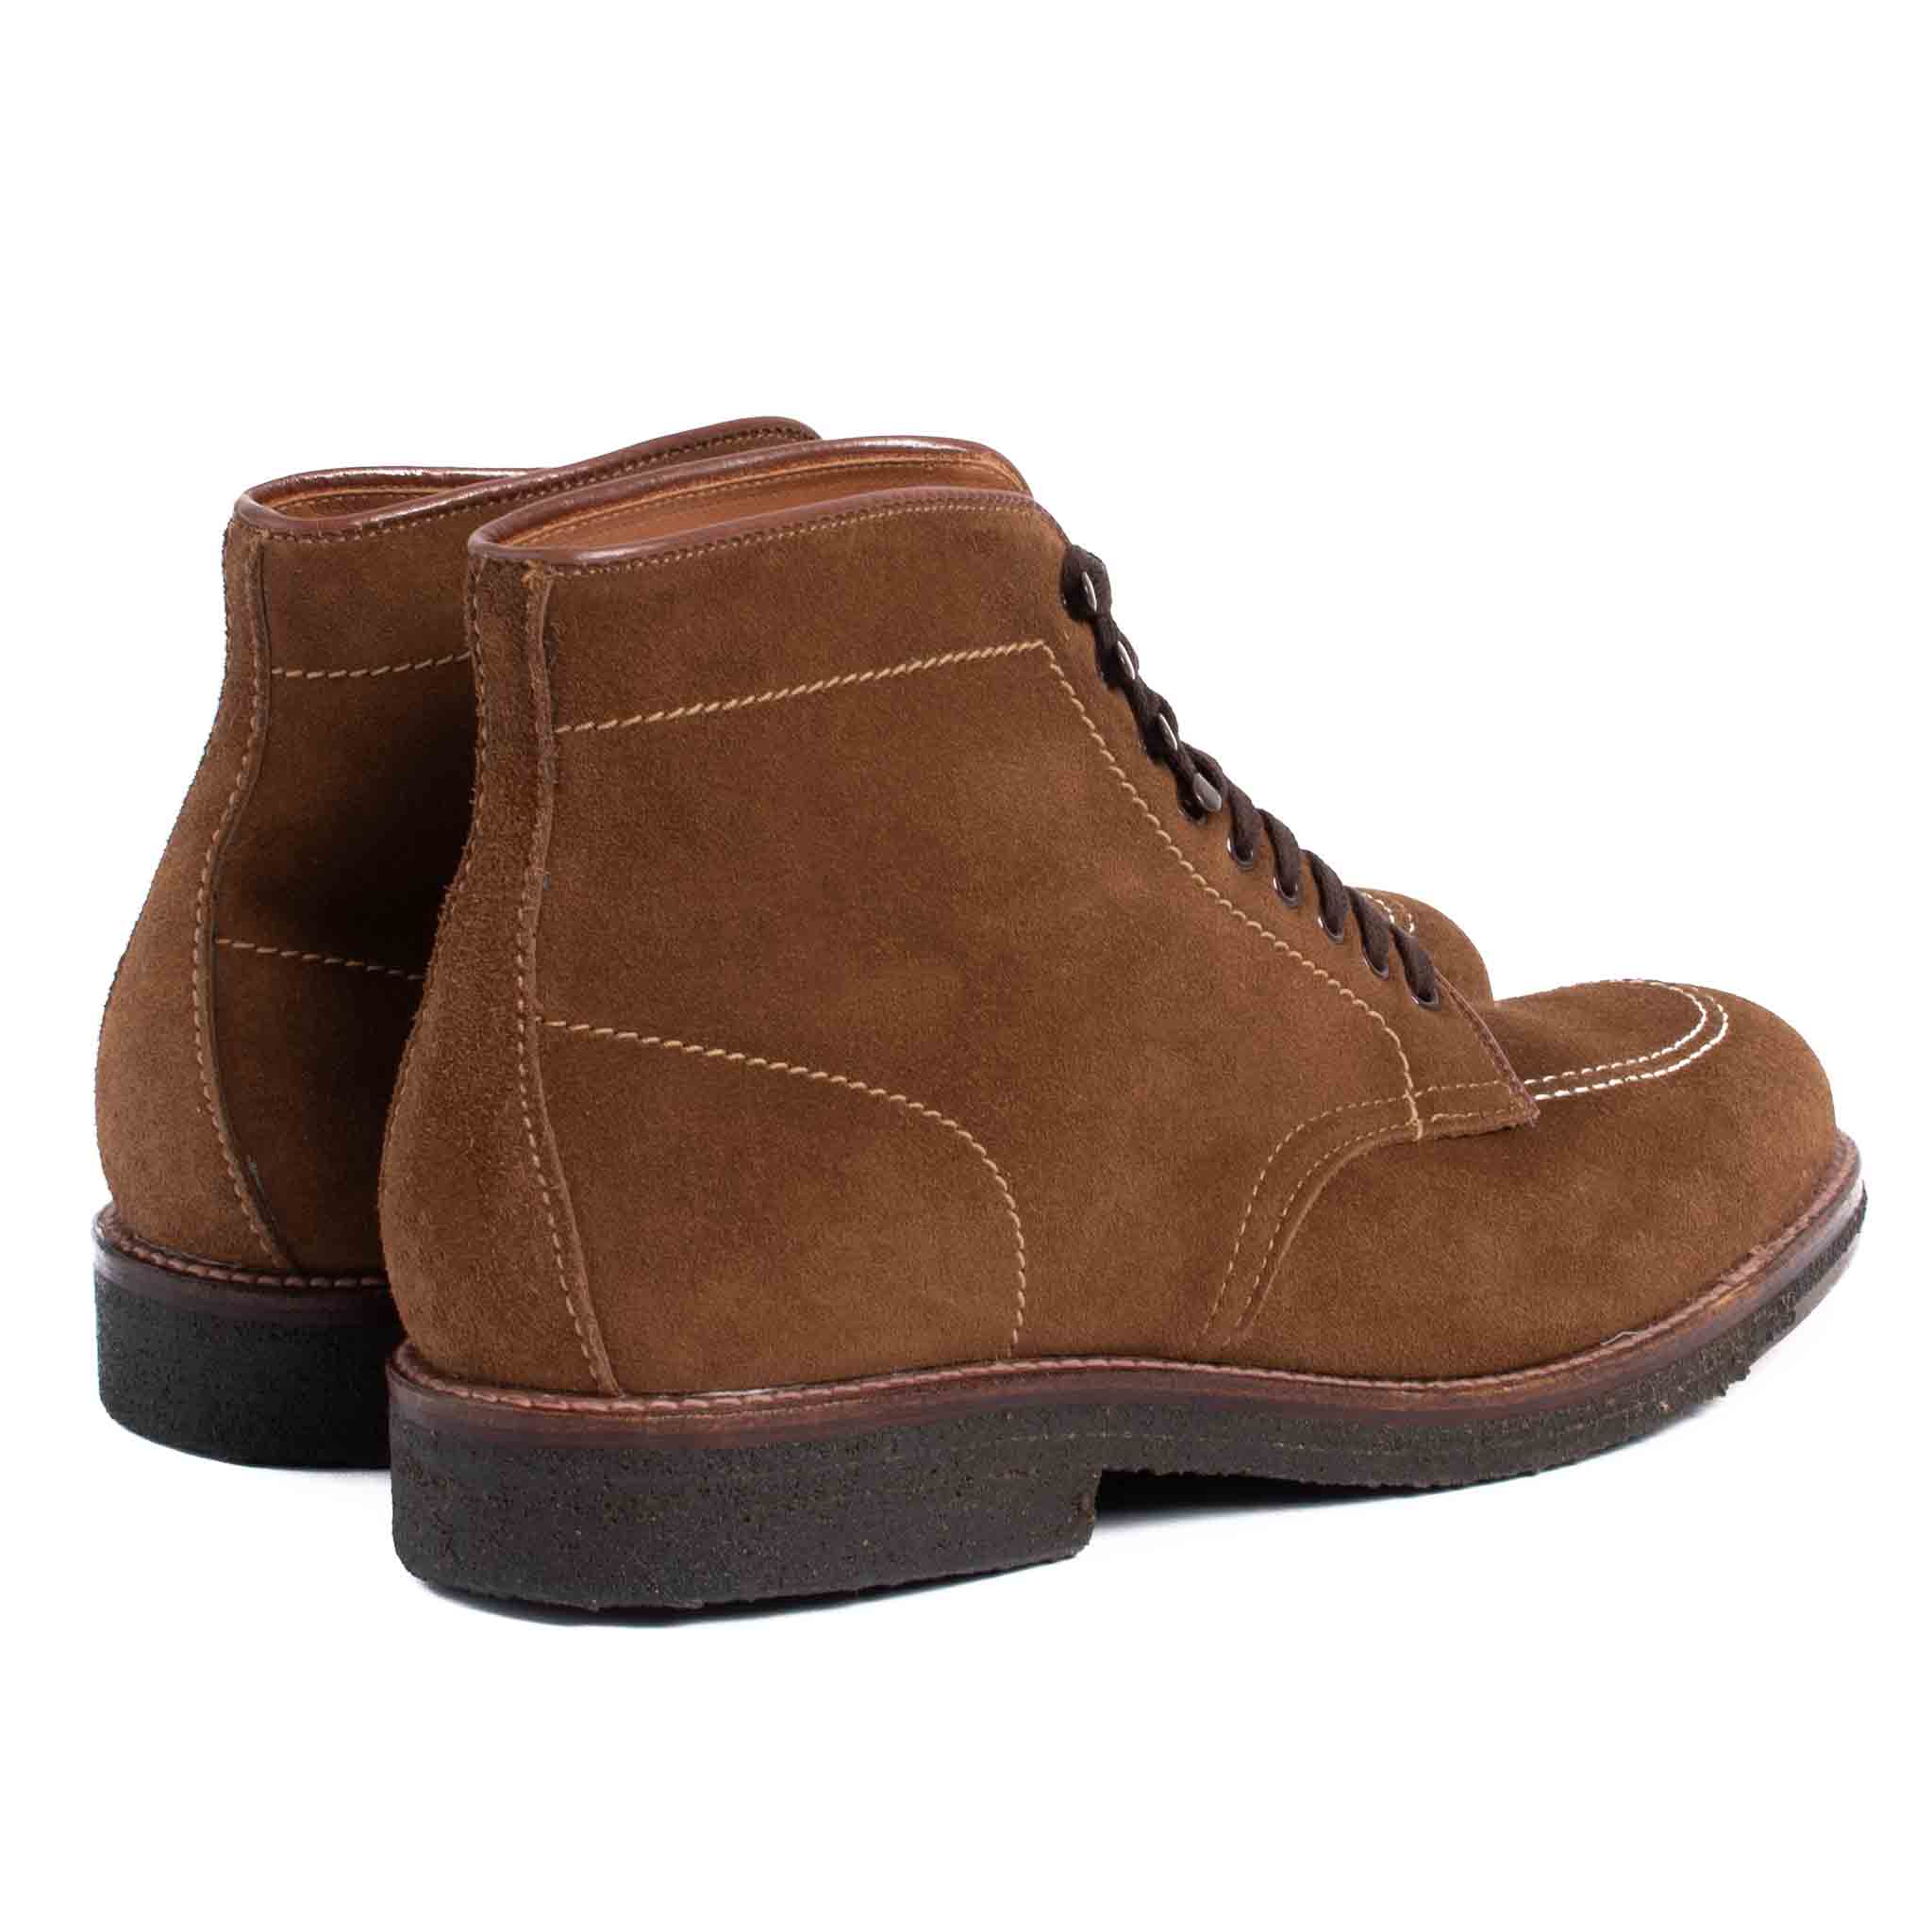 Alden Snuff Suede Indy Boot with Crepe Sole Back